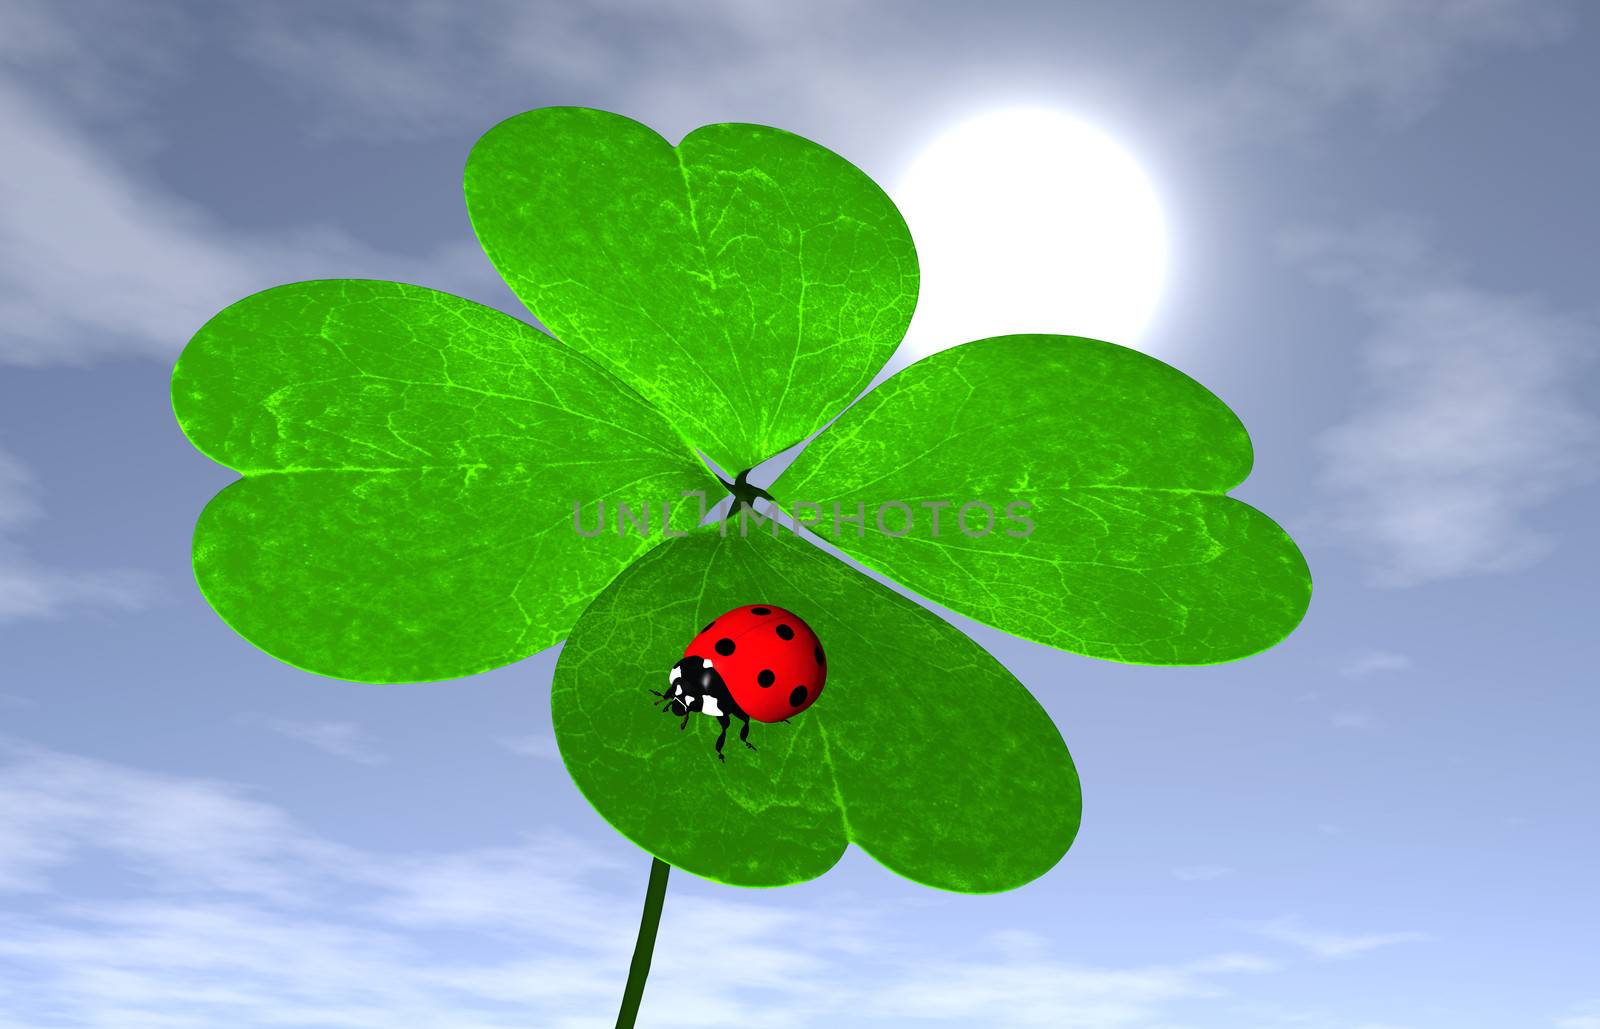 closeup of four-leaf clover that has a red ladybird on one leaf, with the sun and some clouds in the sky behind it on the background